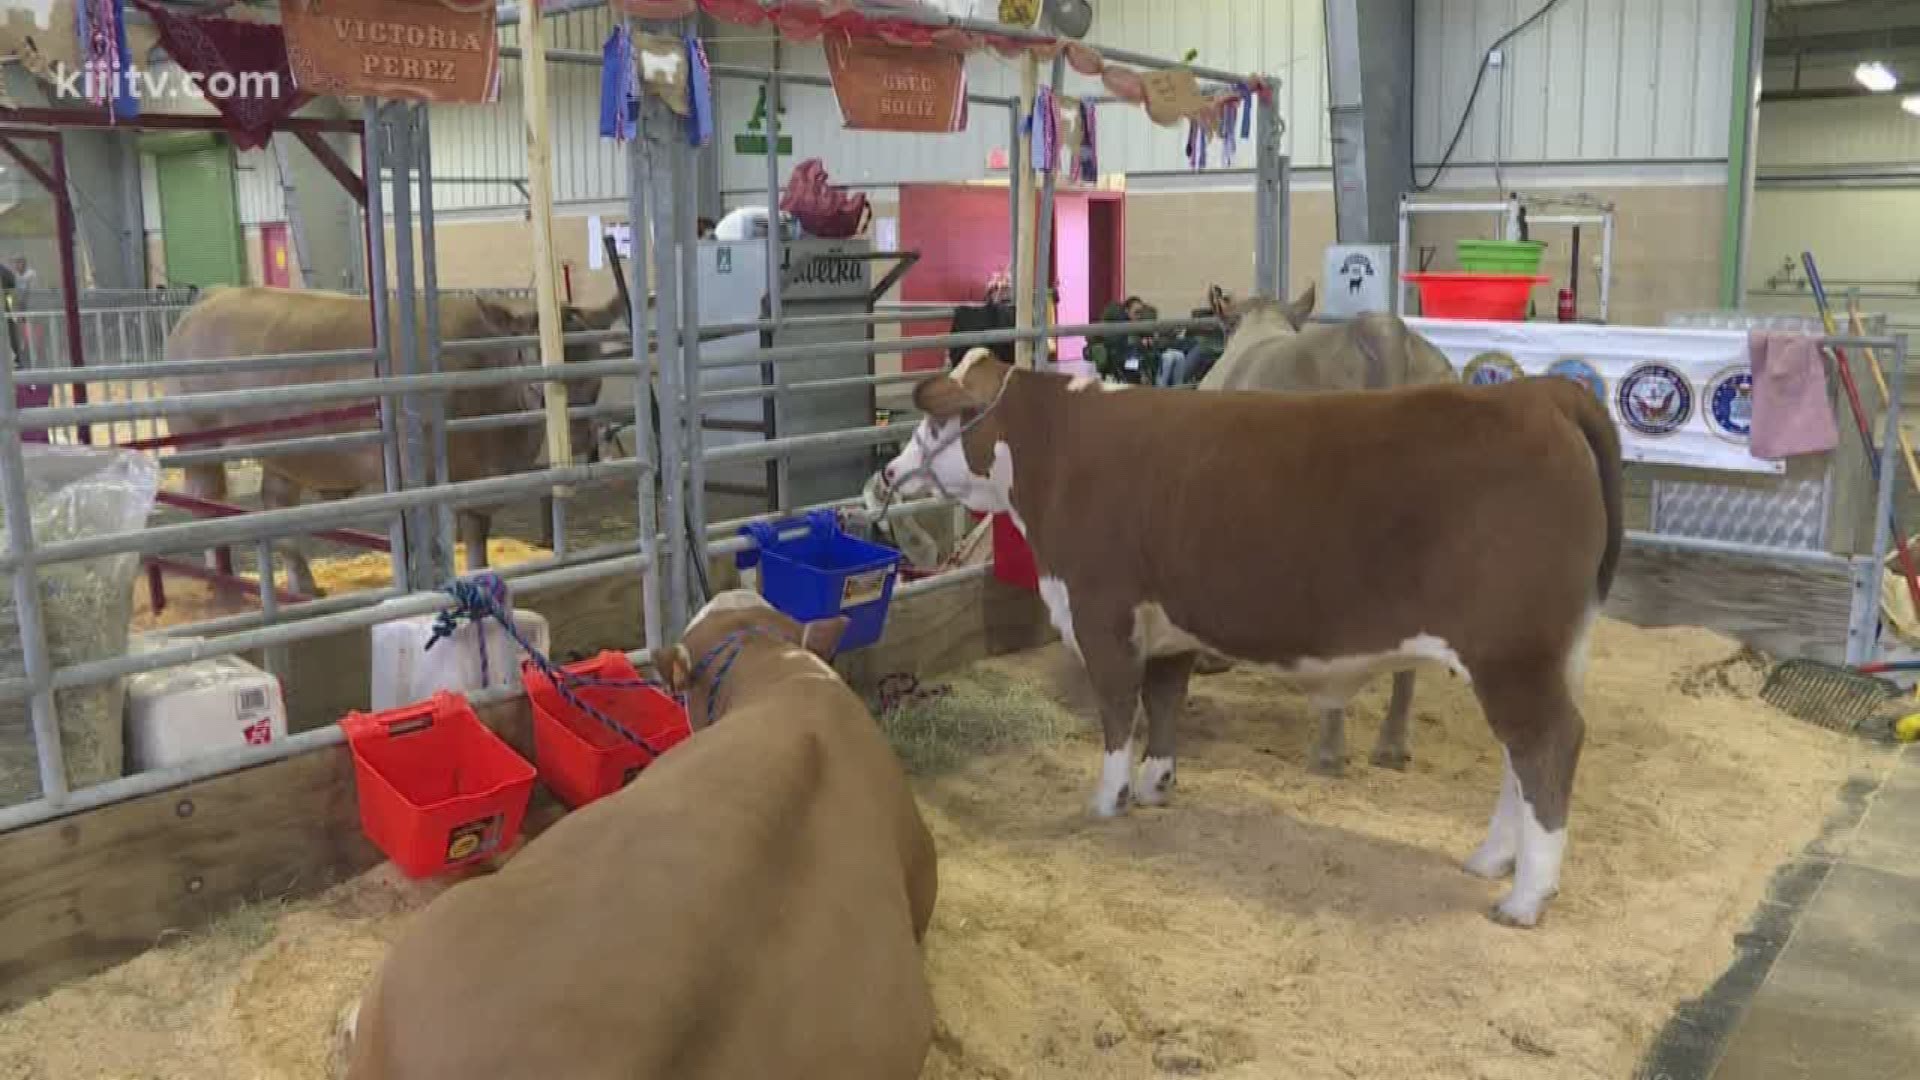 Two high school students shared what they've learned by raising cattle despite winning or losing.